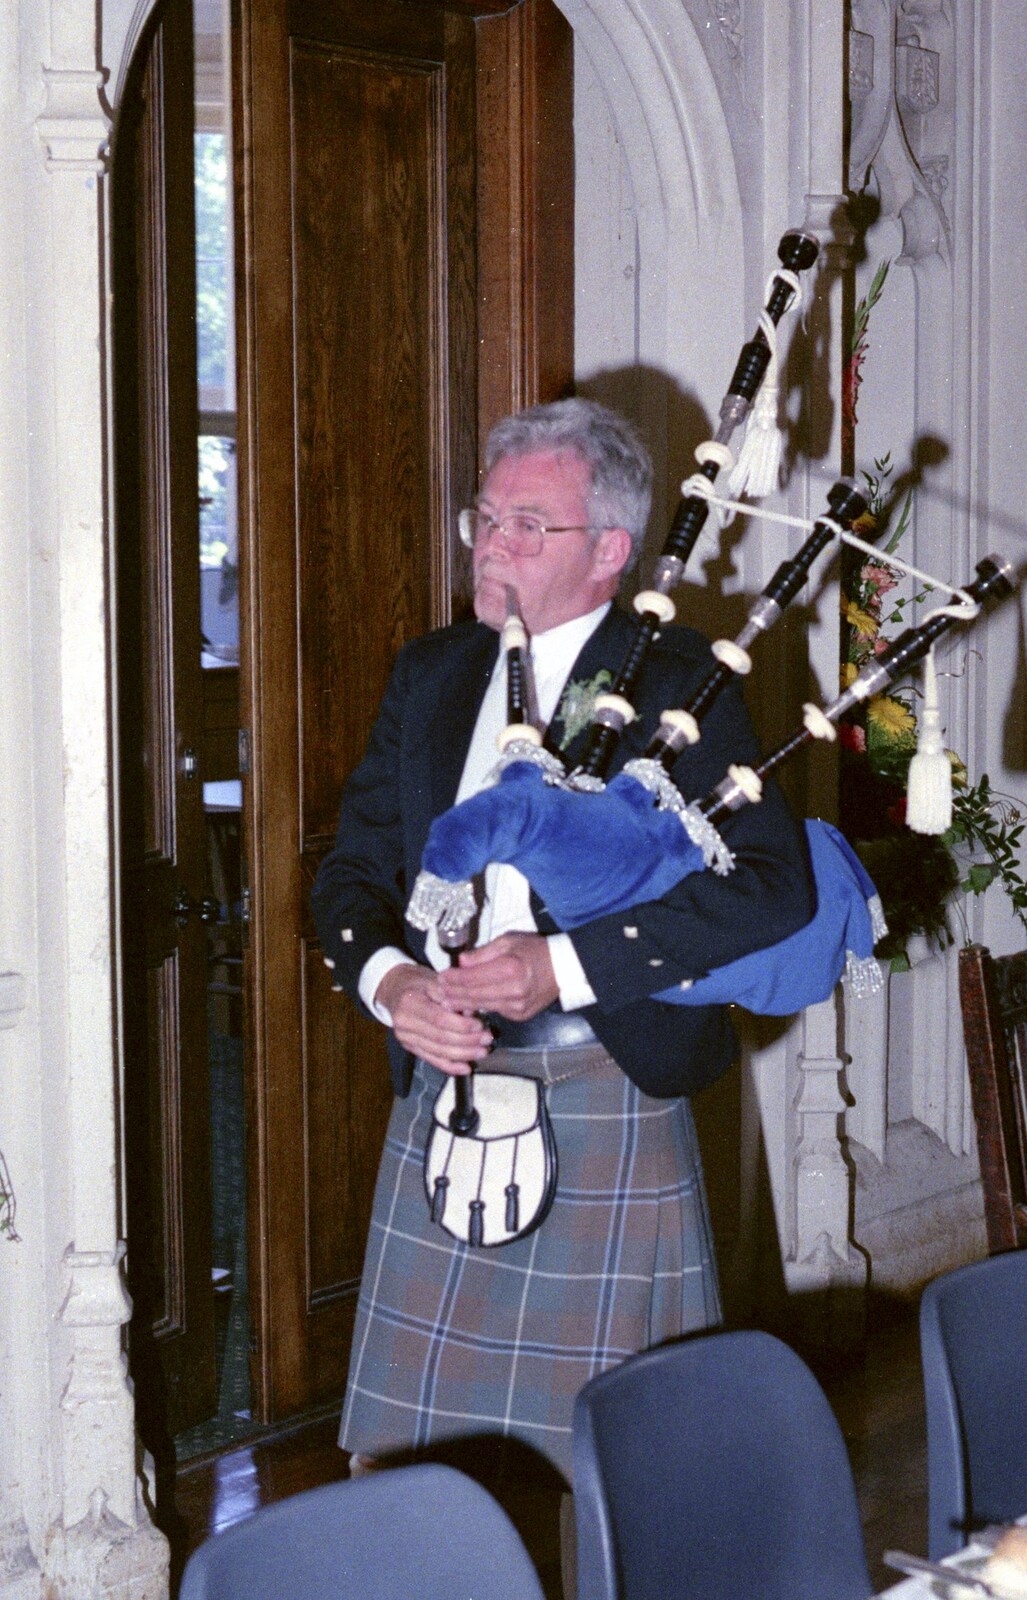 Hamish and Jane's Wedding, Canford School, Wimborne, Dorset - 5th August 1998: Hamish's dad, John, appears with his bagpipes